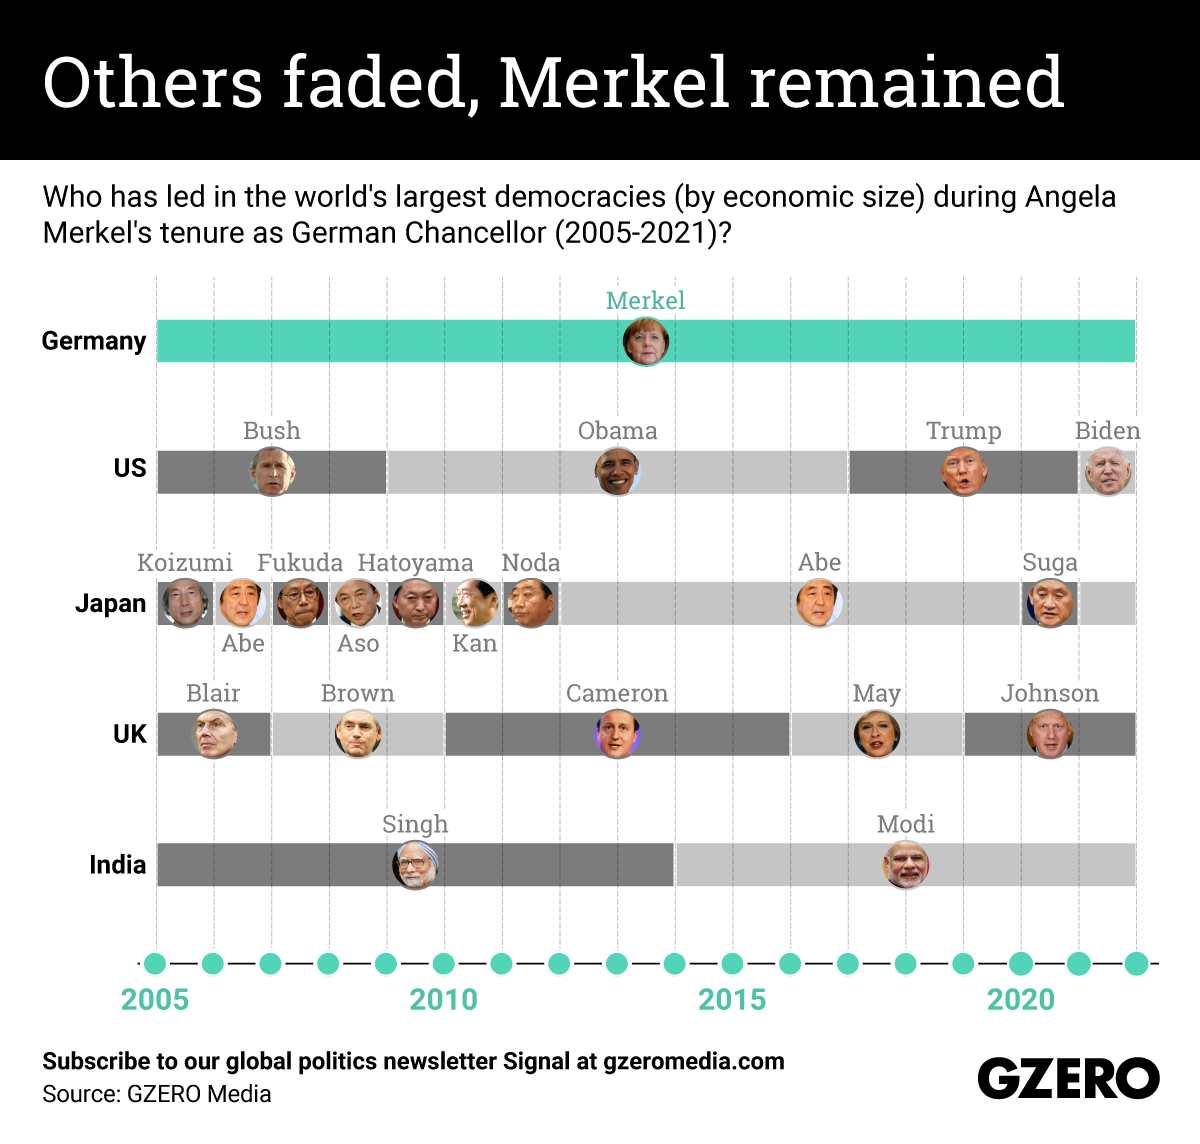 Who has led in the world's largest democracies (by economic size) during Angela Merkel's tenure as German Chancellor (2005-2021)?